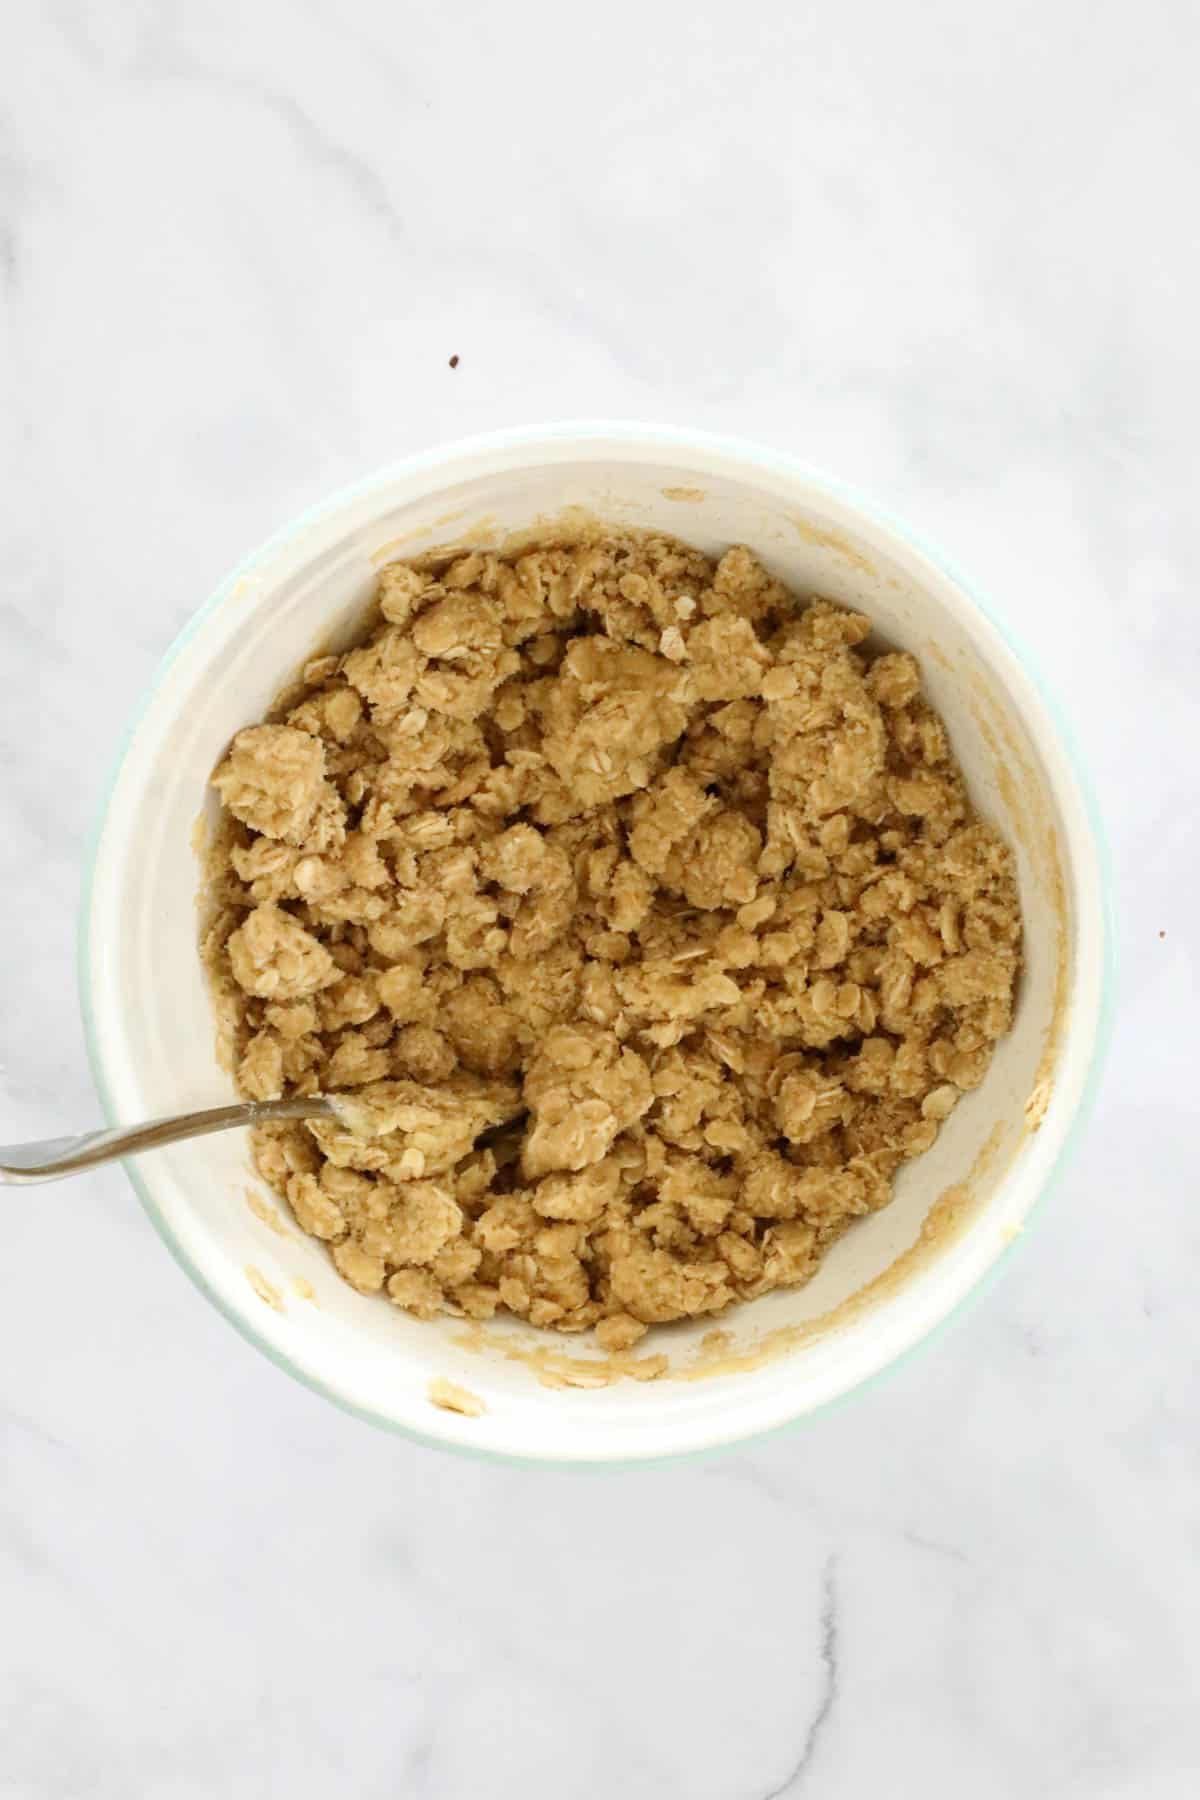 Crumble mix after melted butter added to flour and sugar.